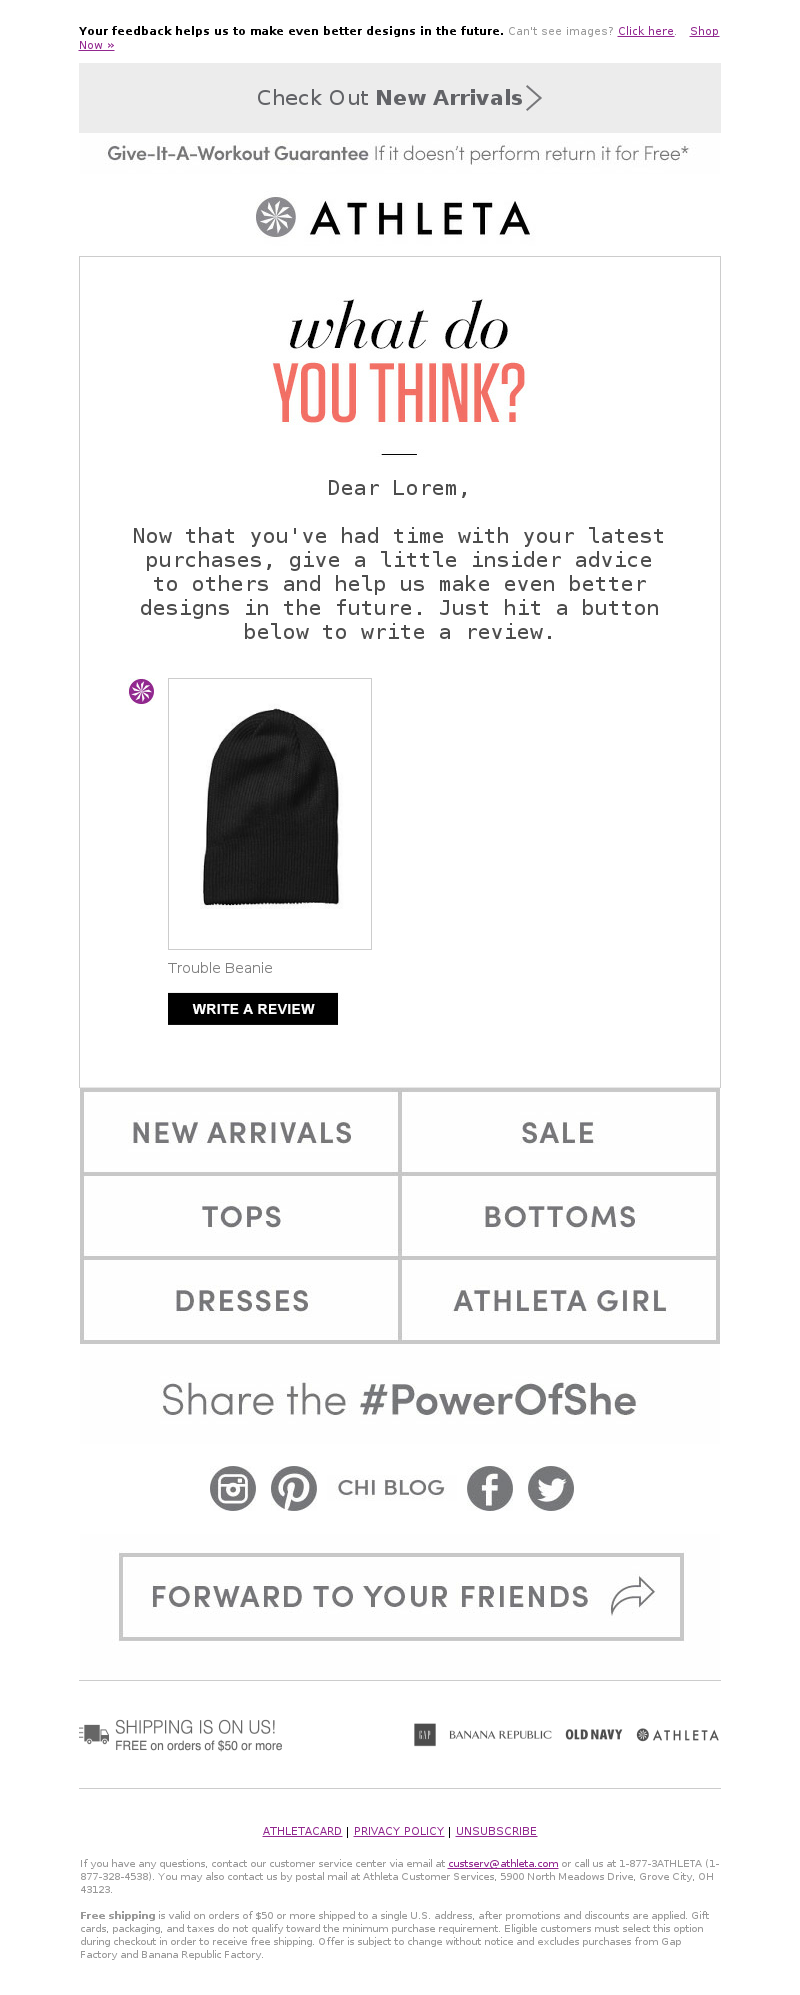 Athleta - Did you like your purchase? Write a review!